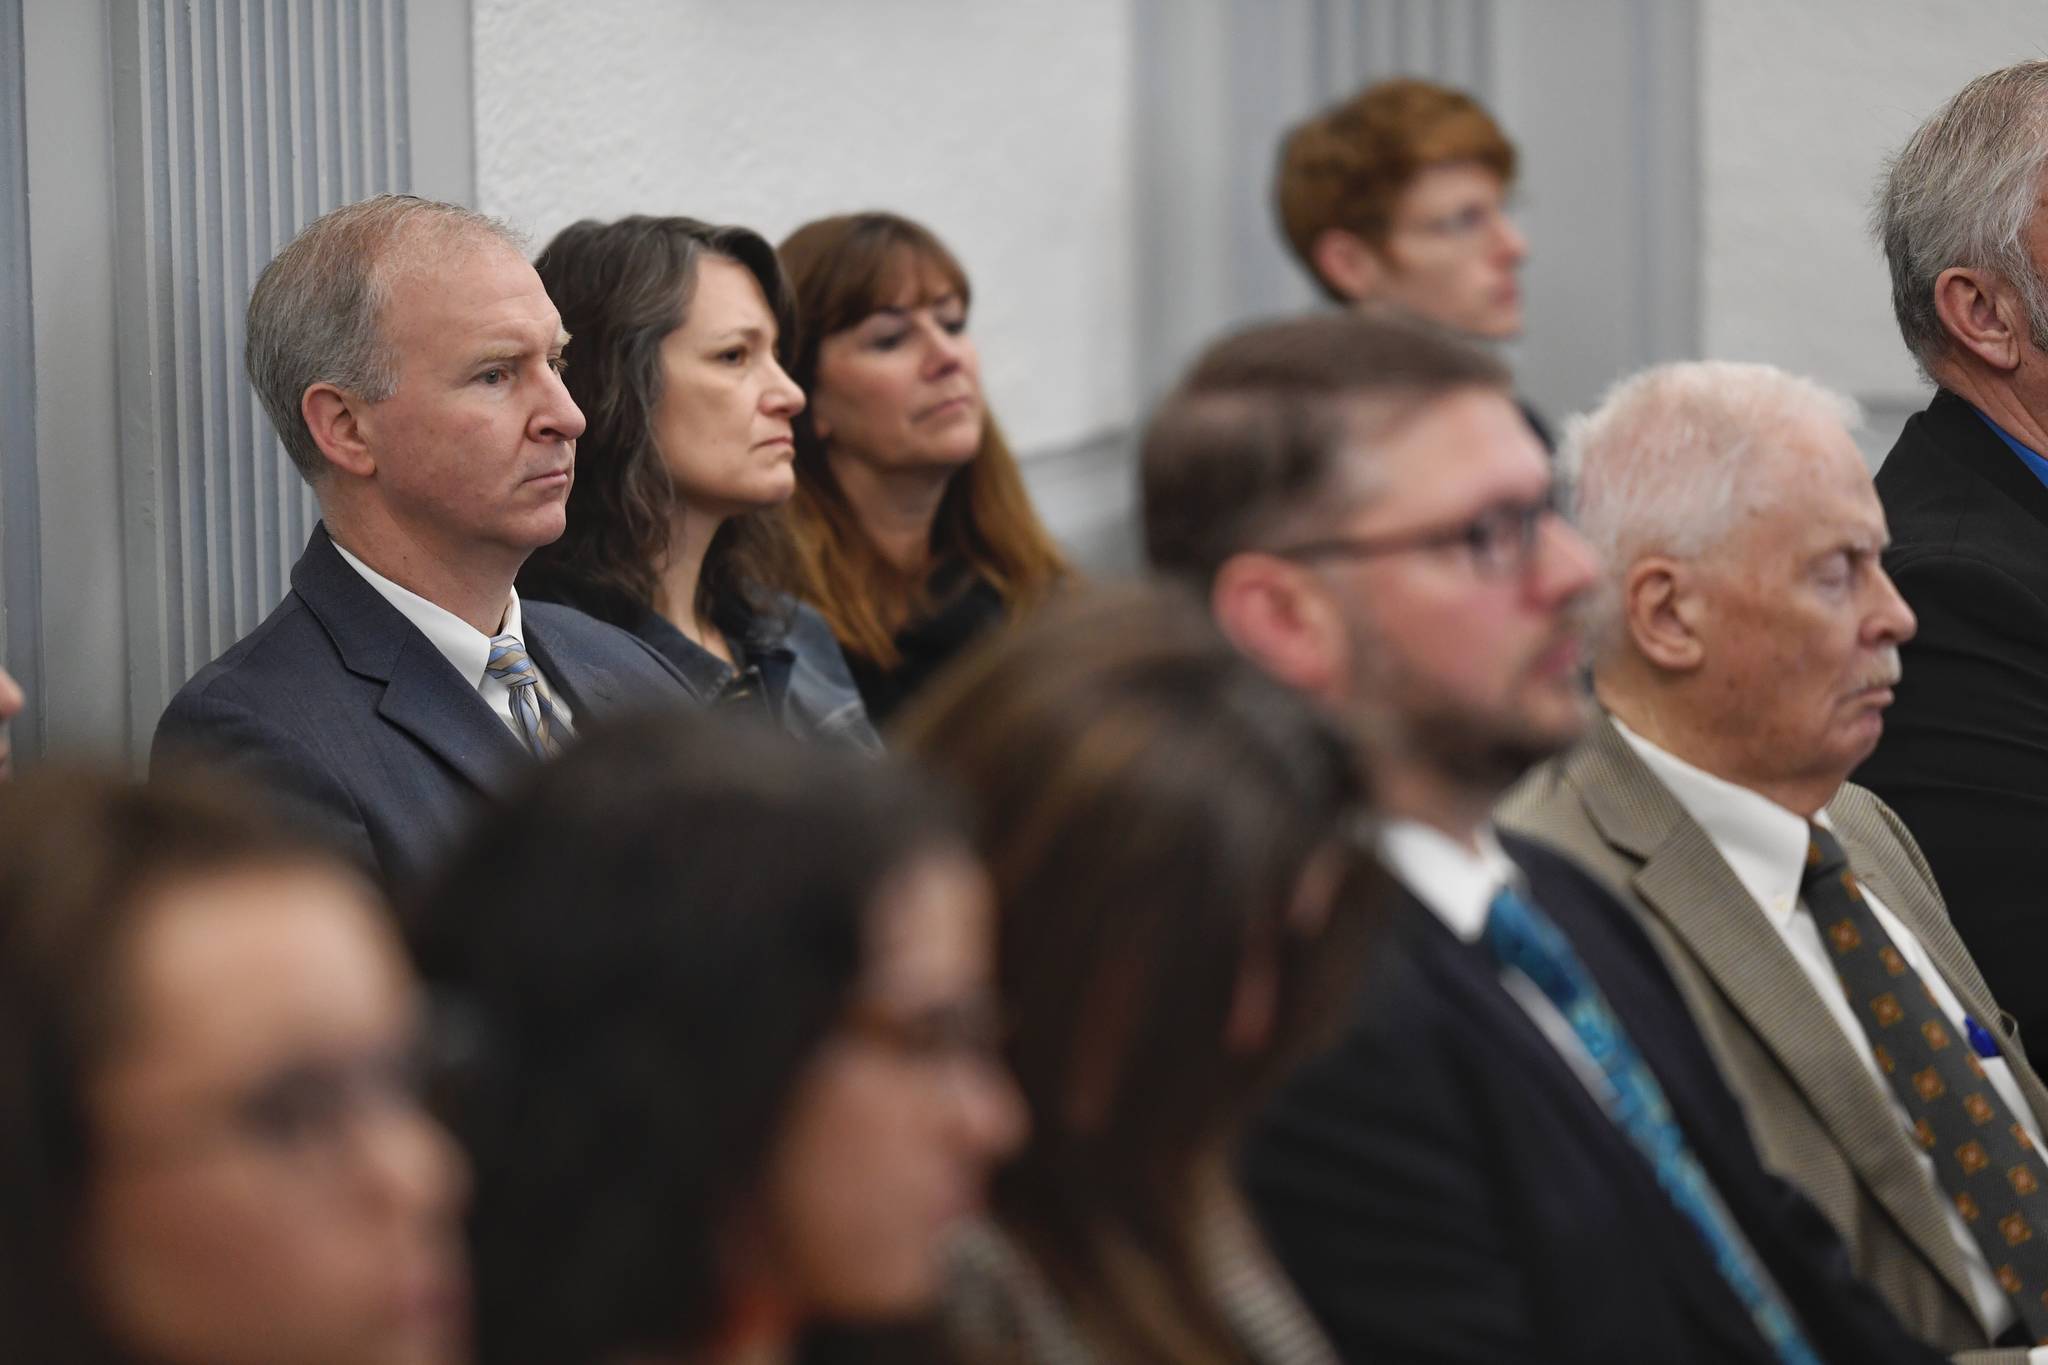 Brian Holst, president of the Juneau School District’s Board of Education, left, Kristin Bartlett, JSD Chief of Staff, center, and Bridget Weiss, JSD Superintendent, watch from the gallery as the Senate Finance Committee listens to a supplemental budget offered by Gov. Mike Dunleavy’s Office of Management and Budget Director Donna Arduin at the Capitol on Tuesday, Jan. 29, 2019. (Michael Penn | Juneau Empire)